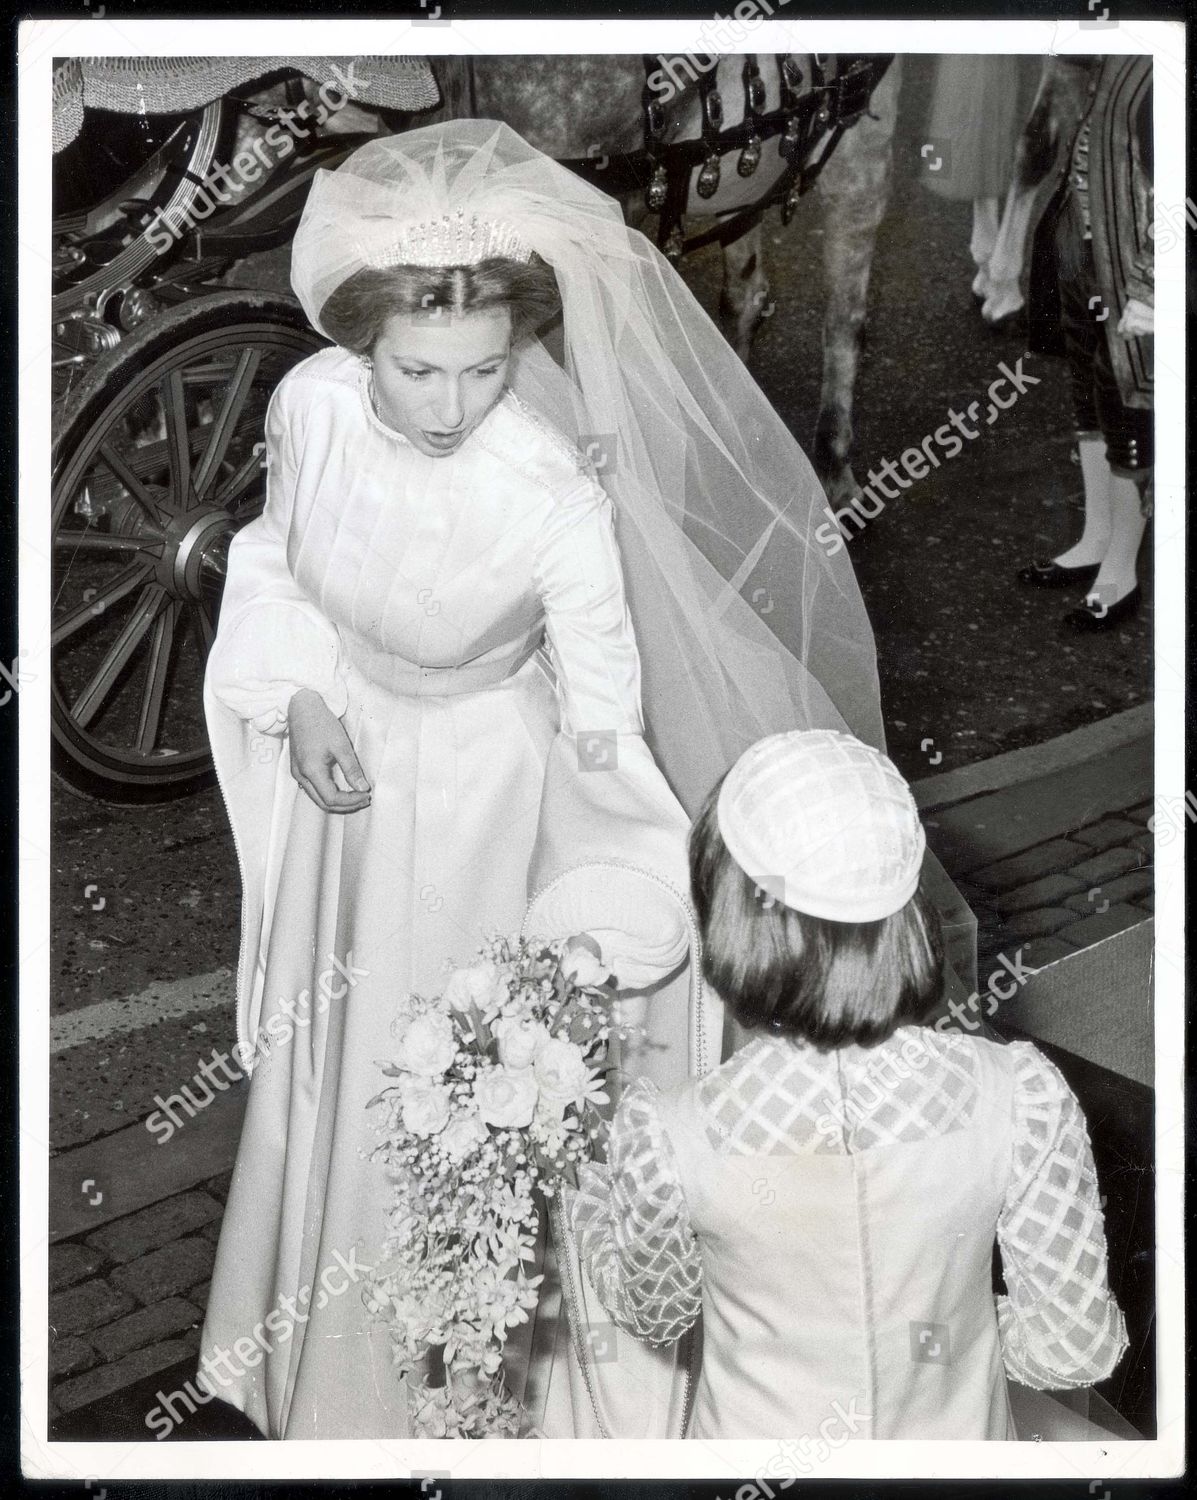 princess-anne-now-princess-royal-wedding-scenes-westminster-abbey-1973-picture-shows-princess-anne-presenting-her-bouquet-to-the-bridesmaid-lady-sarah-armstrong-jones-as-shes-leaving-westminster-abbey-today-after-her-wedding-to-captain-mark-phi-shutterstock-editorial-896339a.jpg